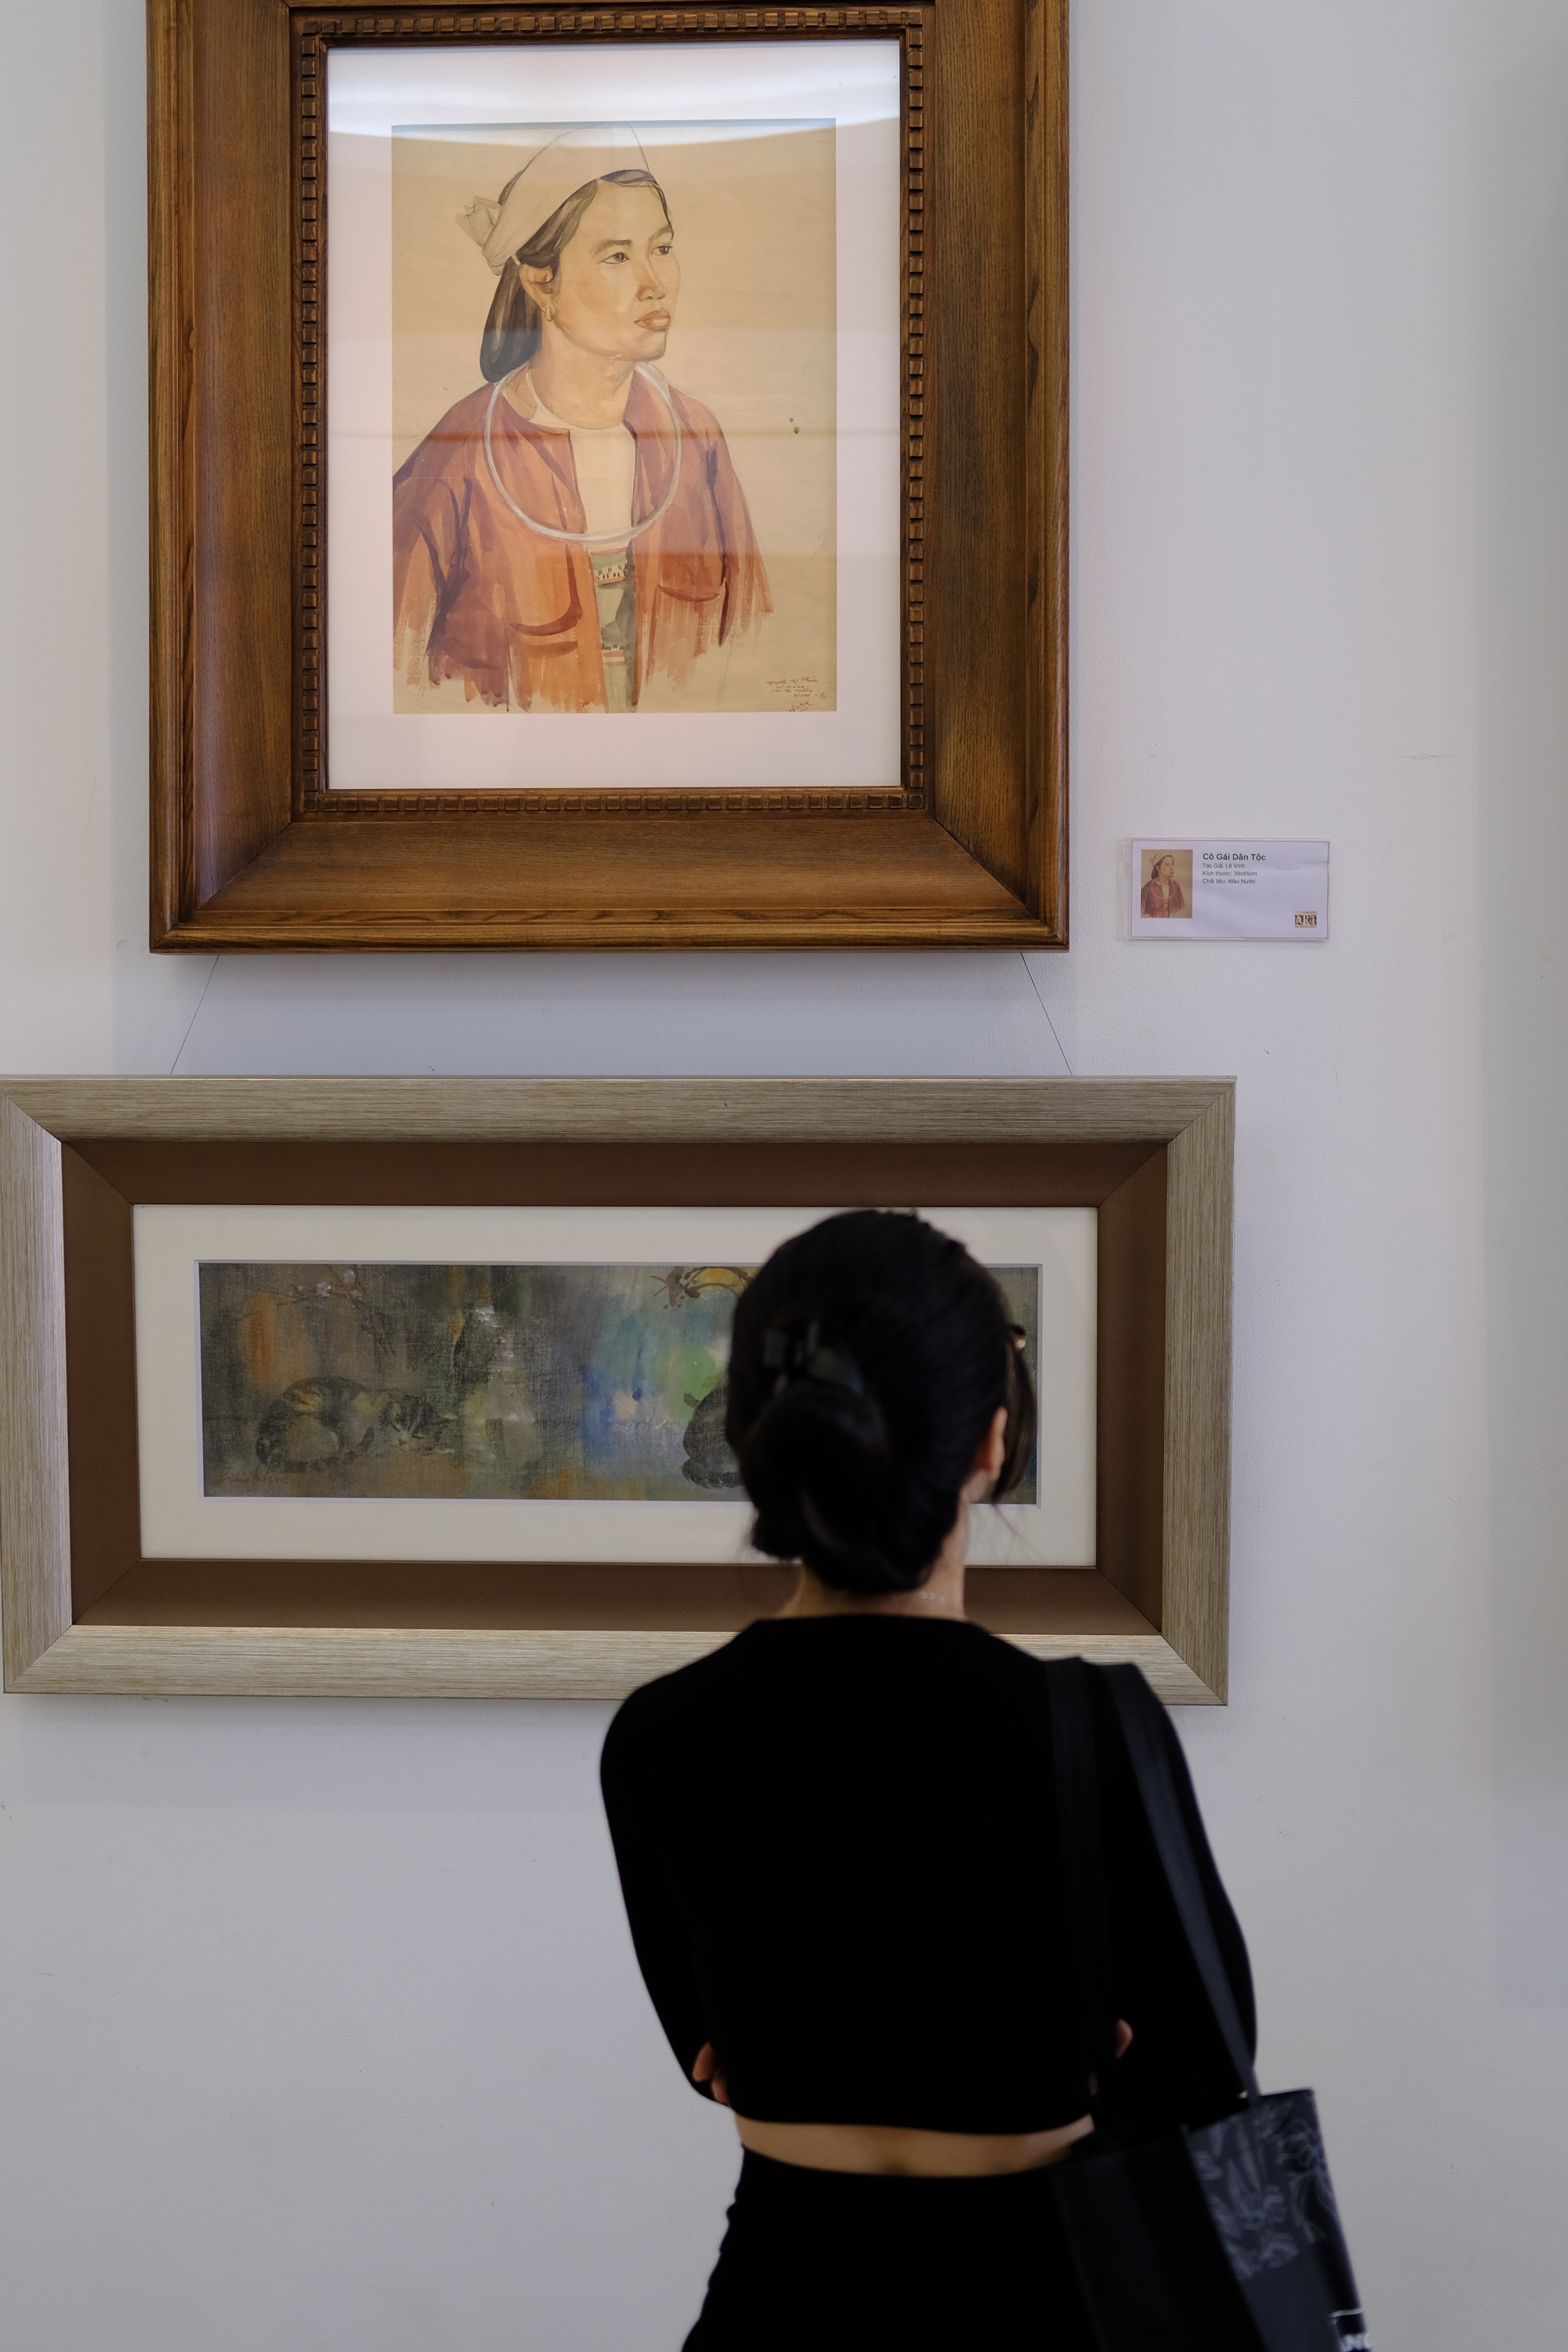 A visitor looks at the watercolor painting titled “Co Gai Dan Toc” (above) by Le Vinh and a silk painting titled “Meo” by Dang Quy Khoa. Photo: Phuong Tran / Tuoi Tre News